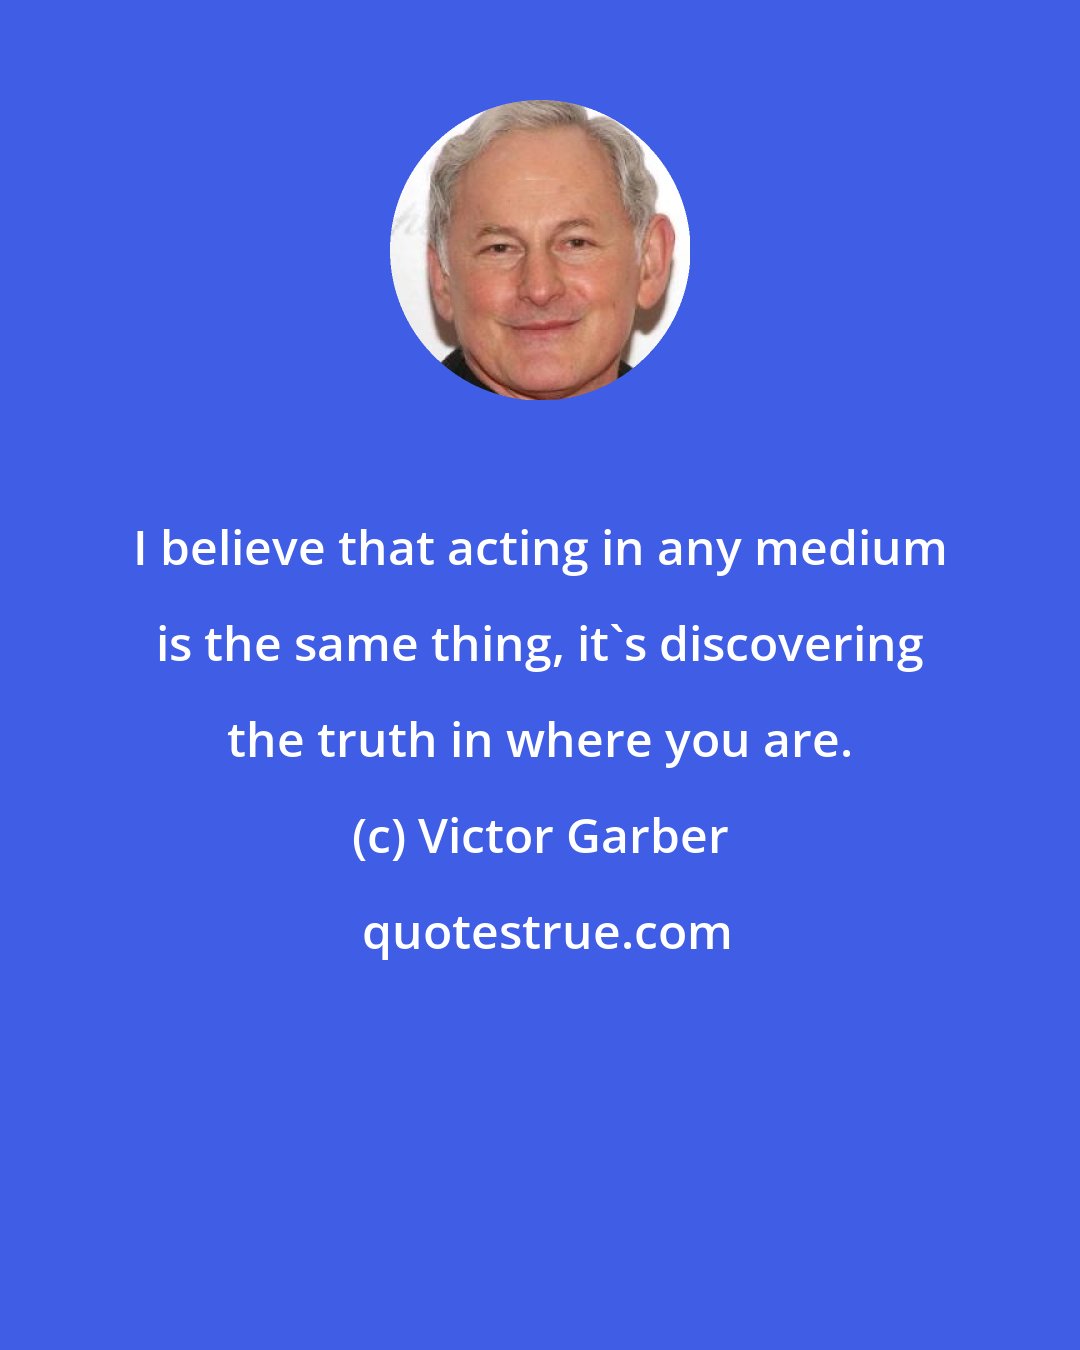 Victor Garber: I believe that acting in any medium is the same thing, it's discovering the truth in where you are.